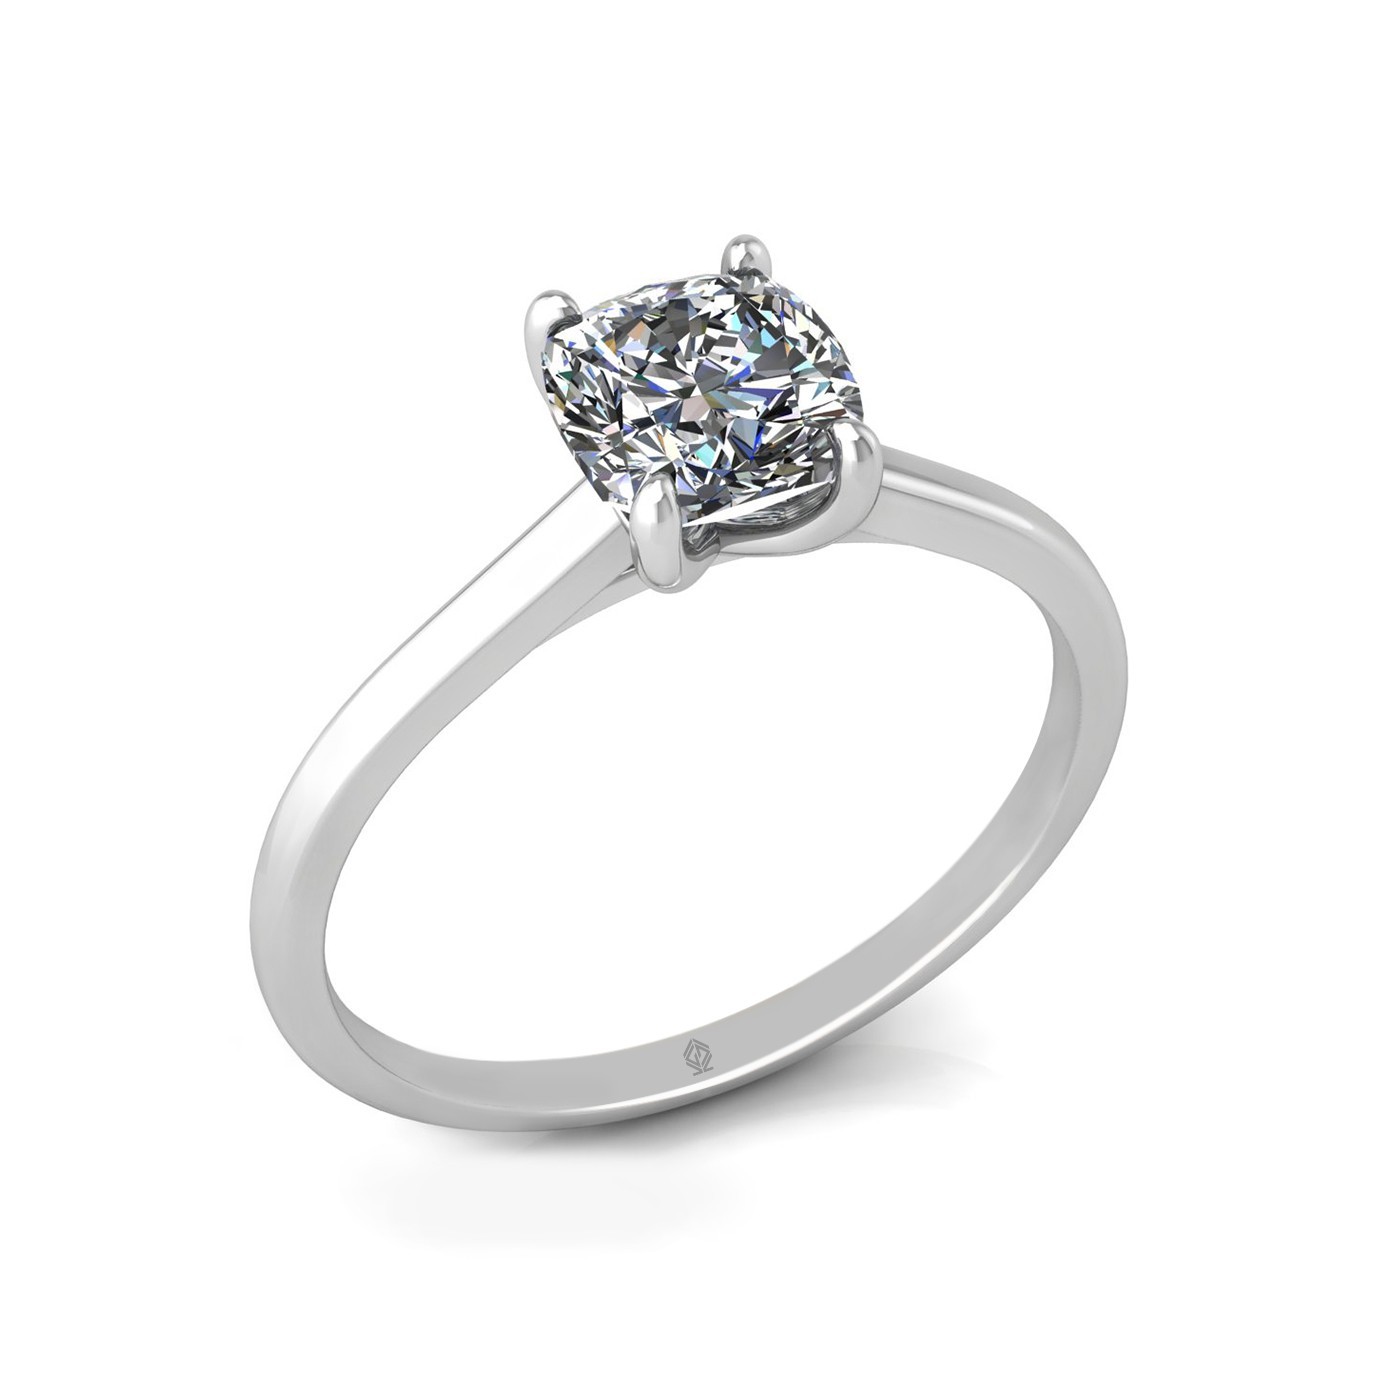 18K WHITE GOLD 4 PRONGS SOLITAIRE CUSHION CUT DIAMOND ENGAGEMENT RING WITH WHISPER THIN BAND